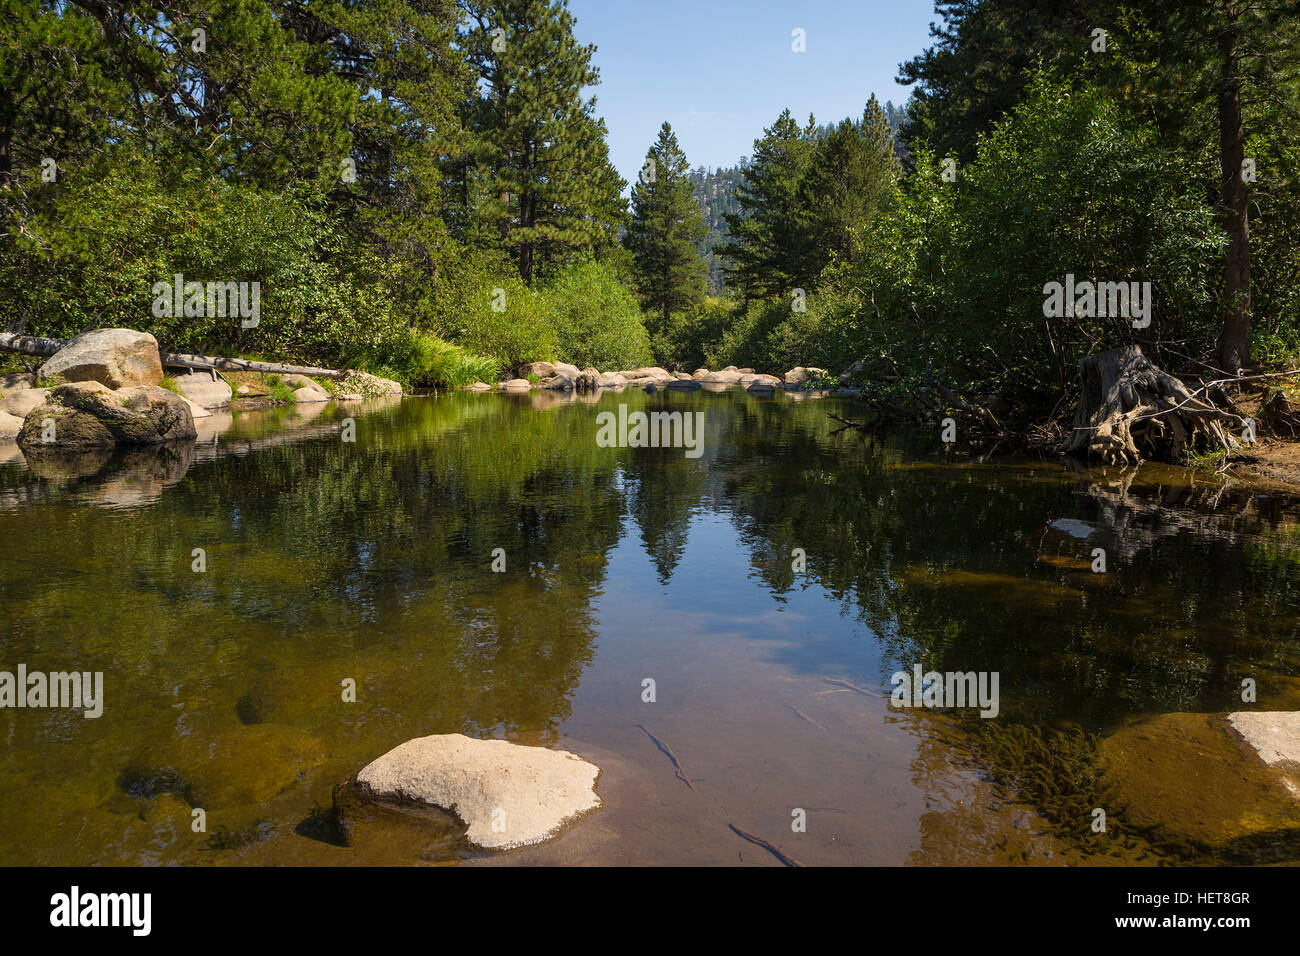 West Fork of the Carson River, California. Peaceful section of river in the forest. Stock Photo